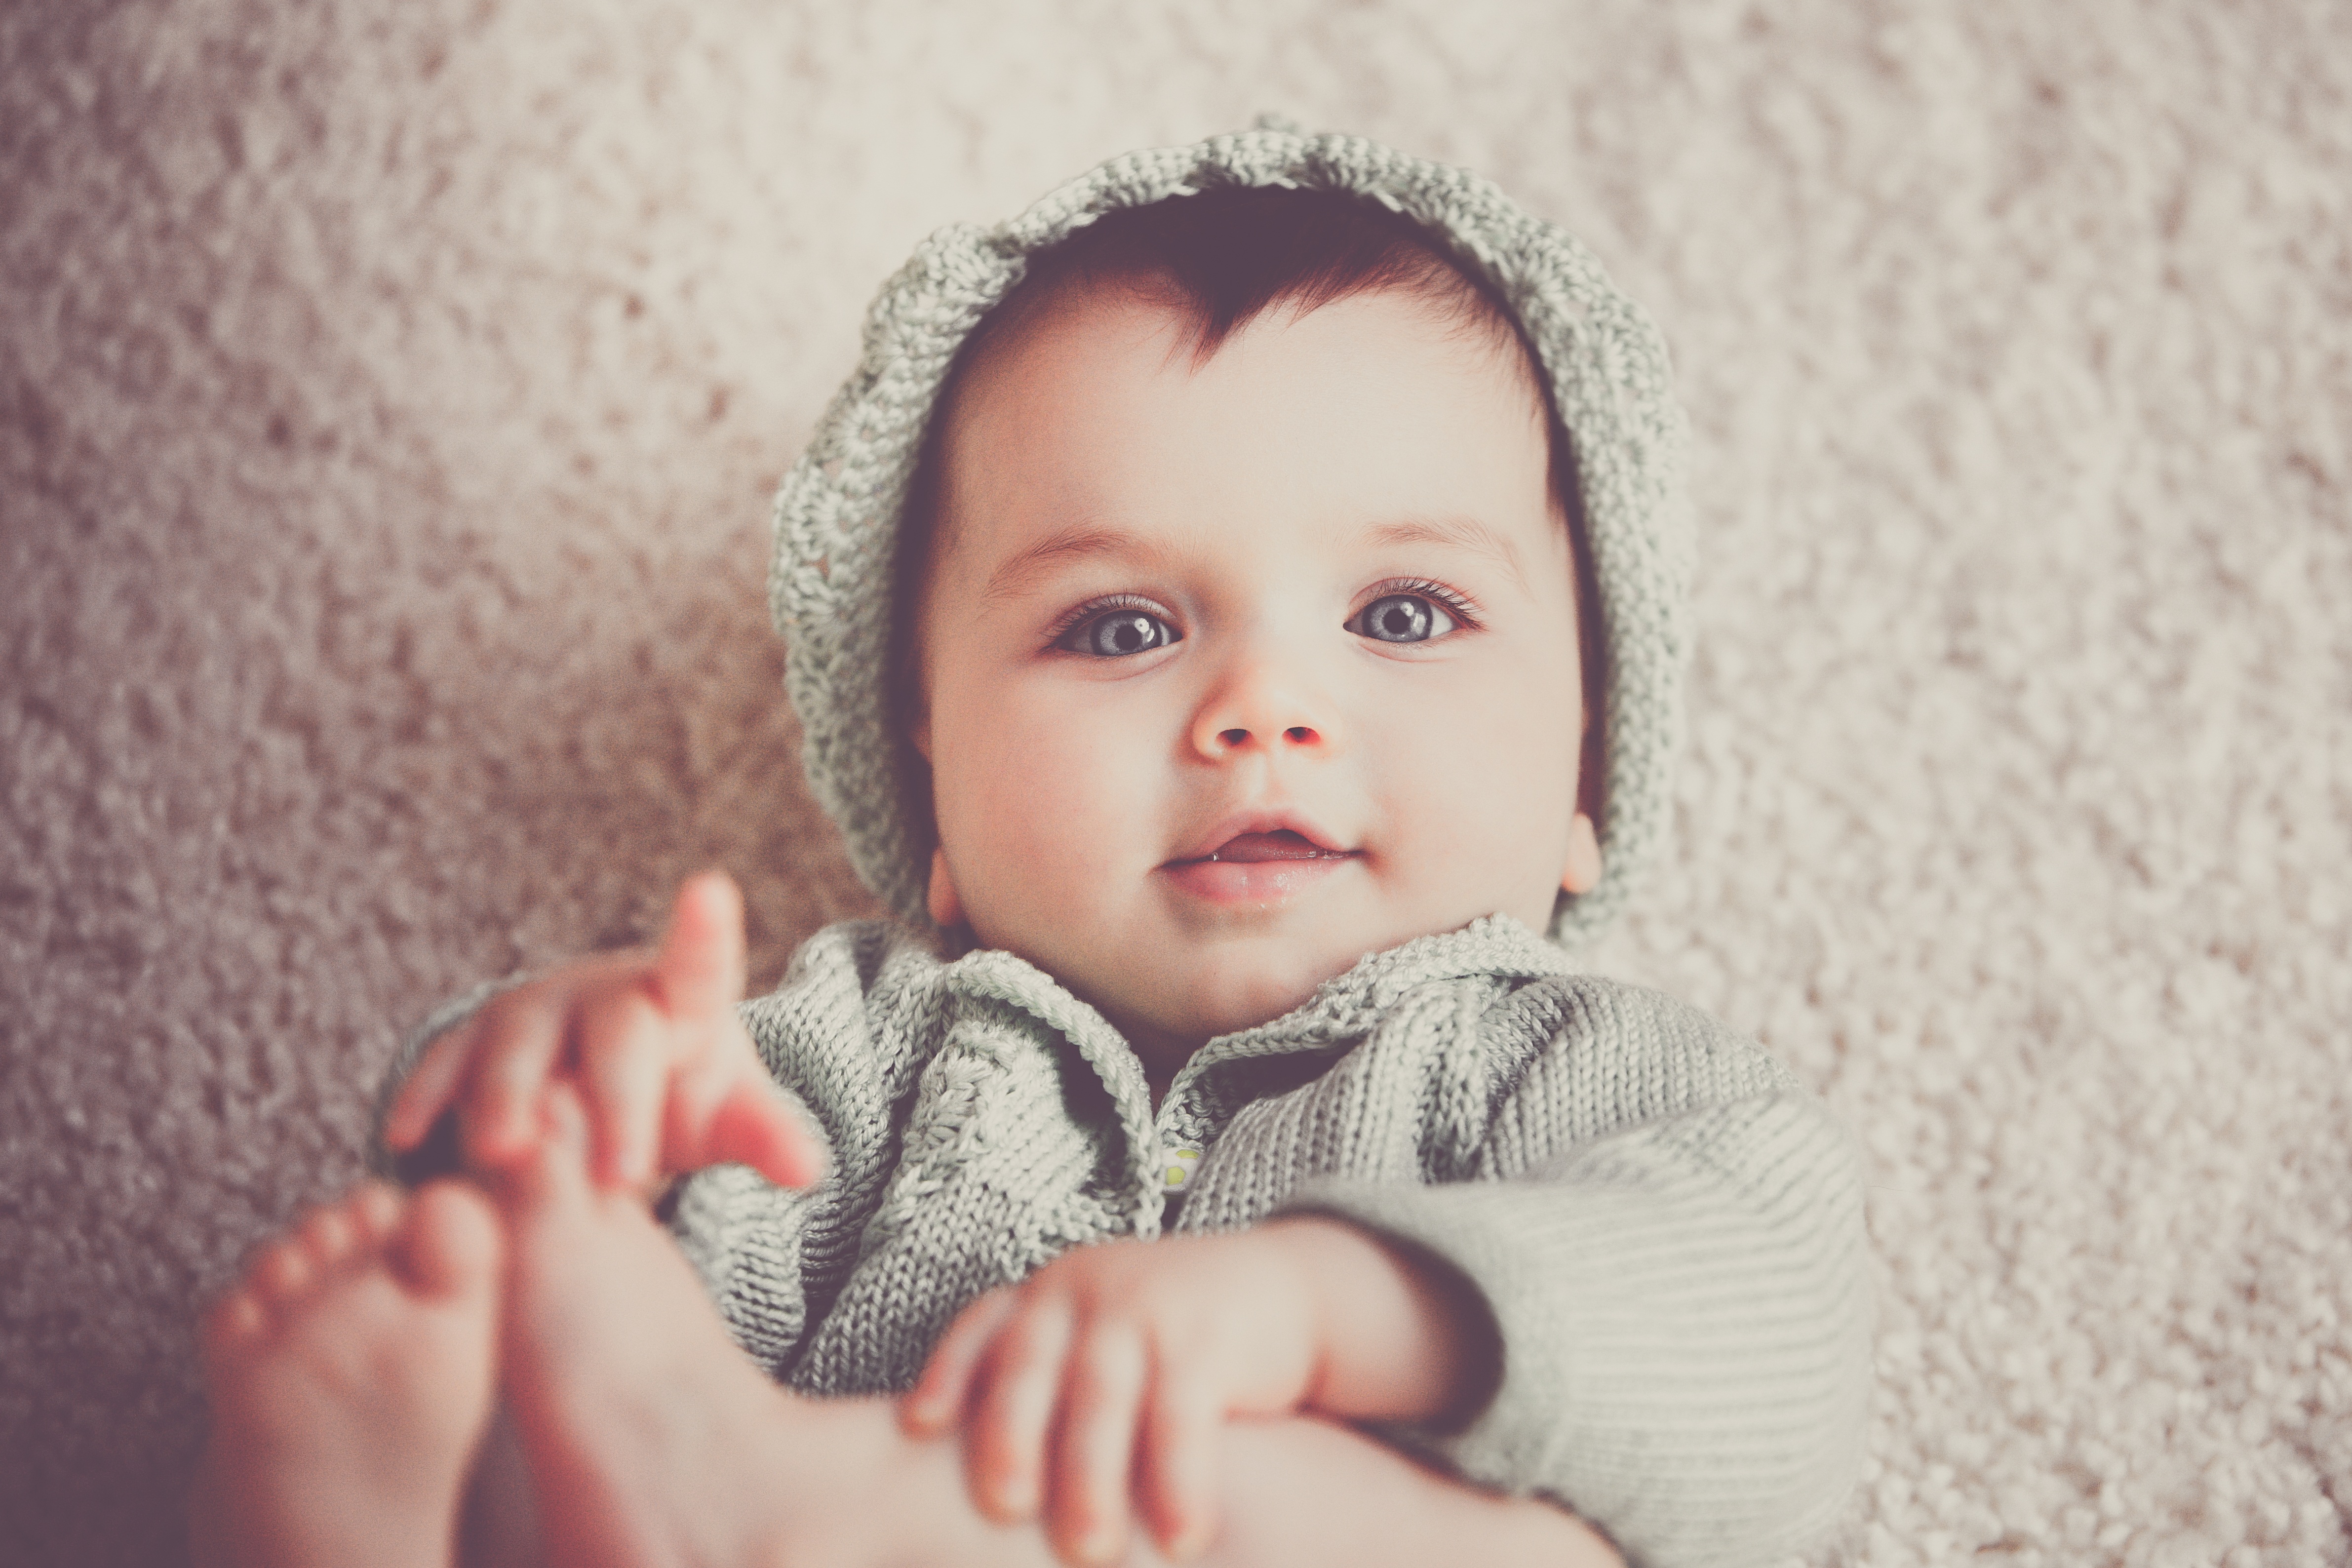 Wallpapers of Cute Baby Boys, Baby Girls, Kids, Child